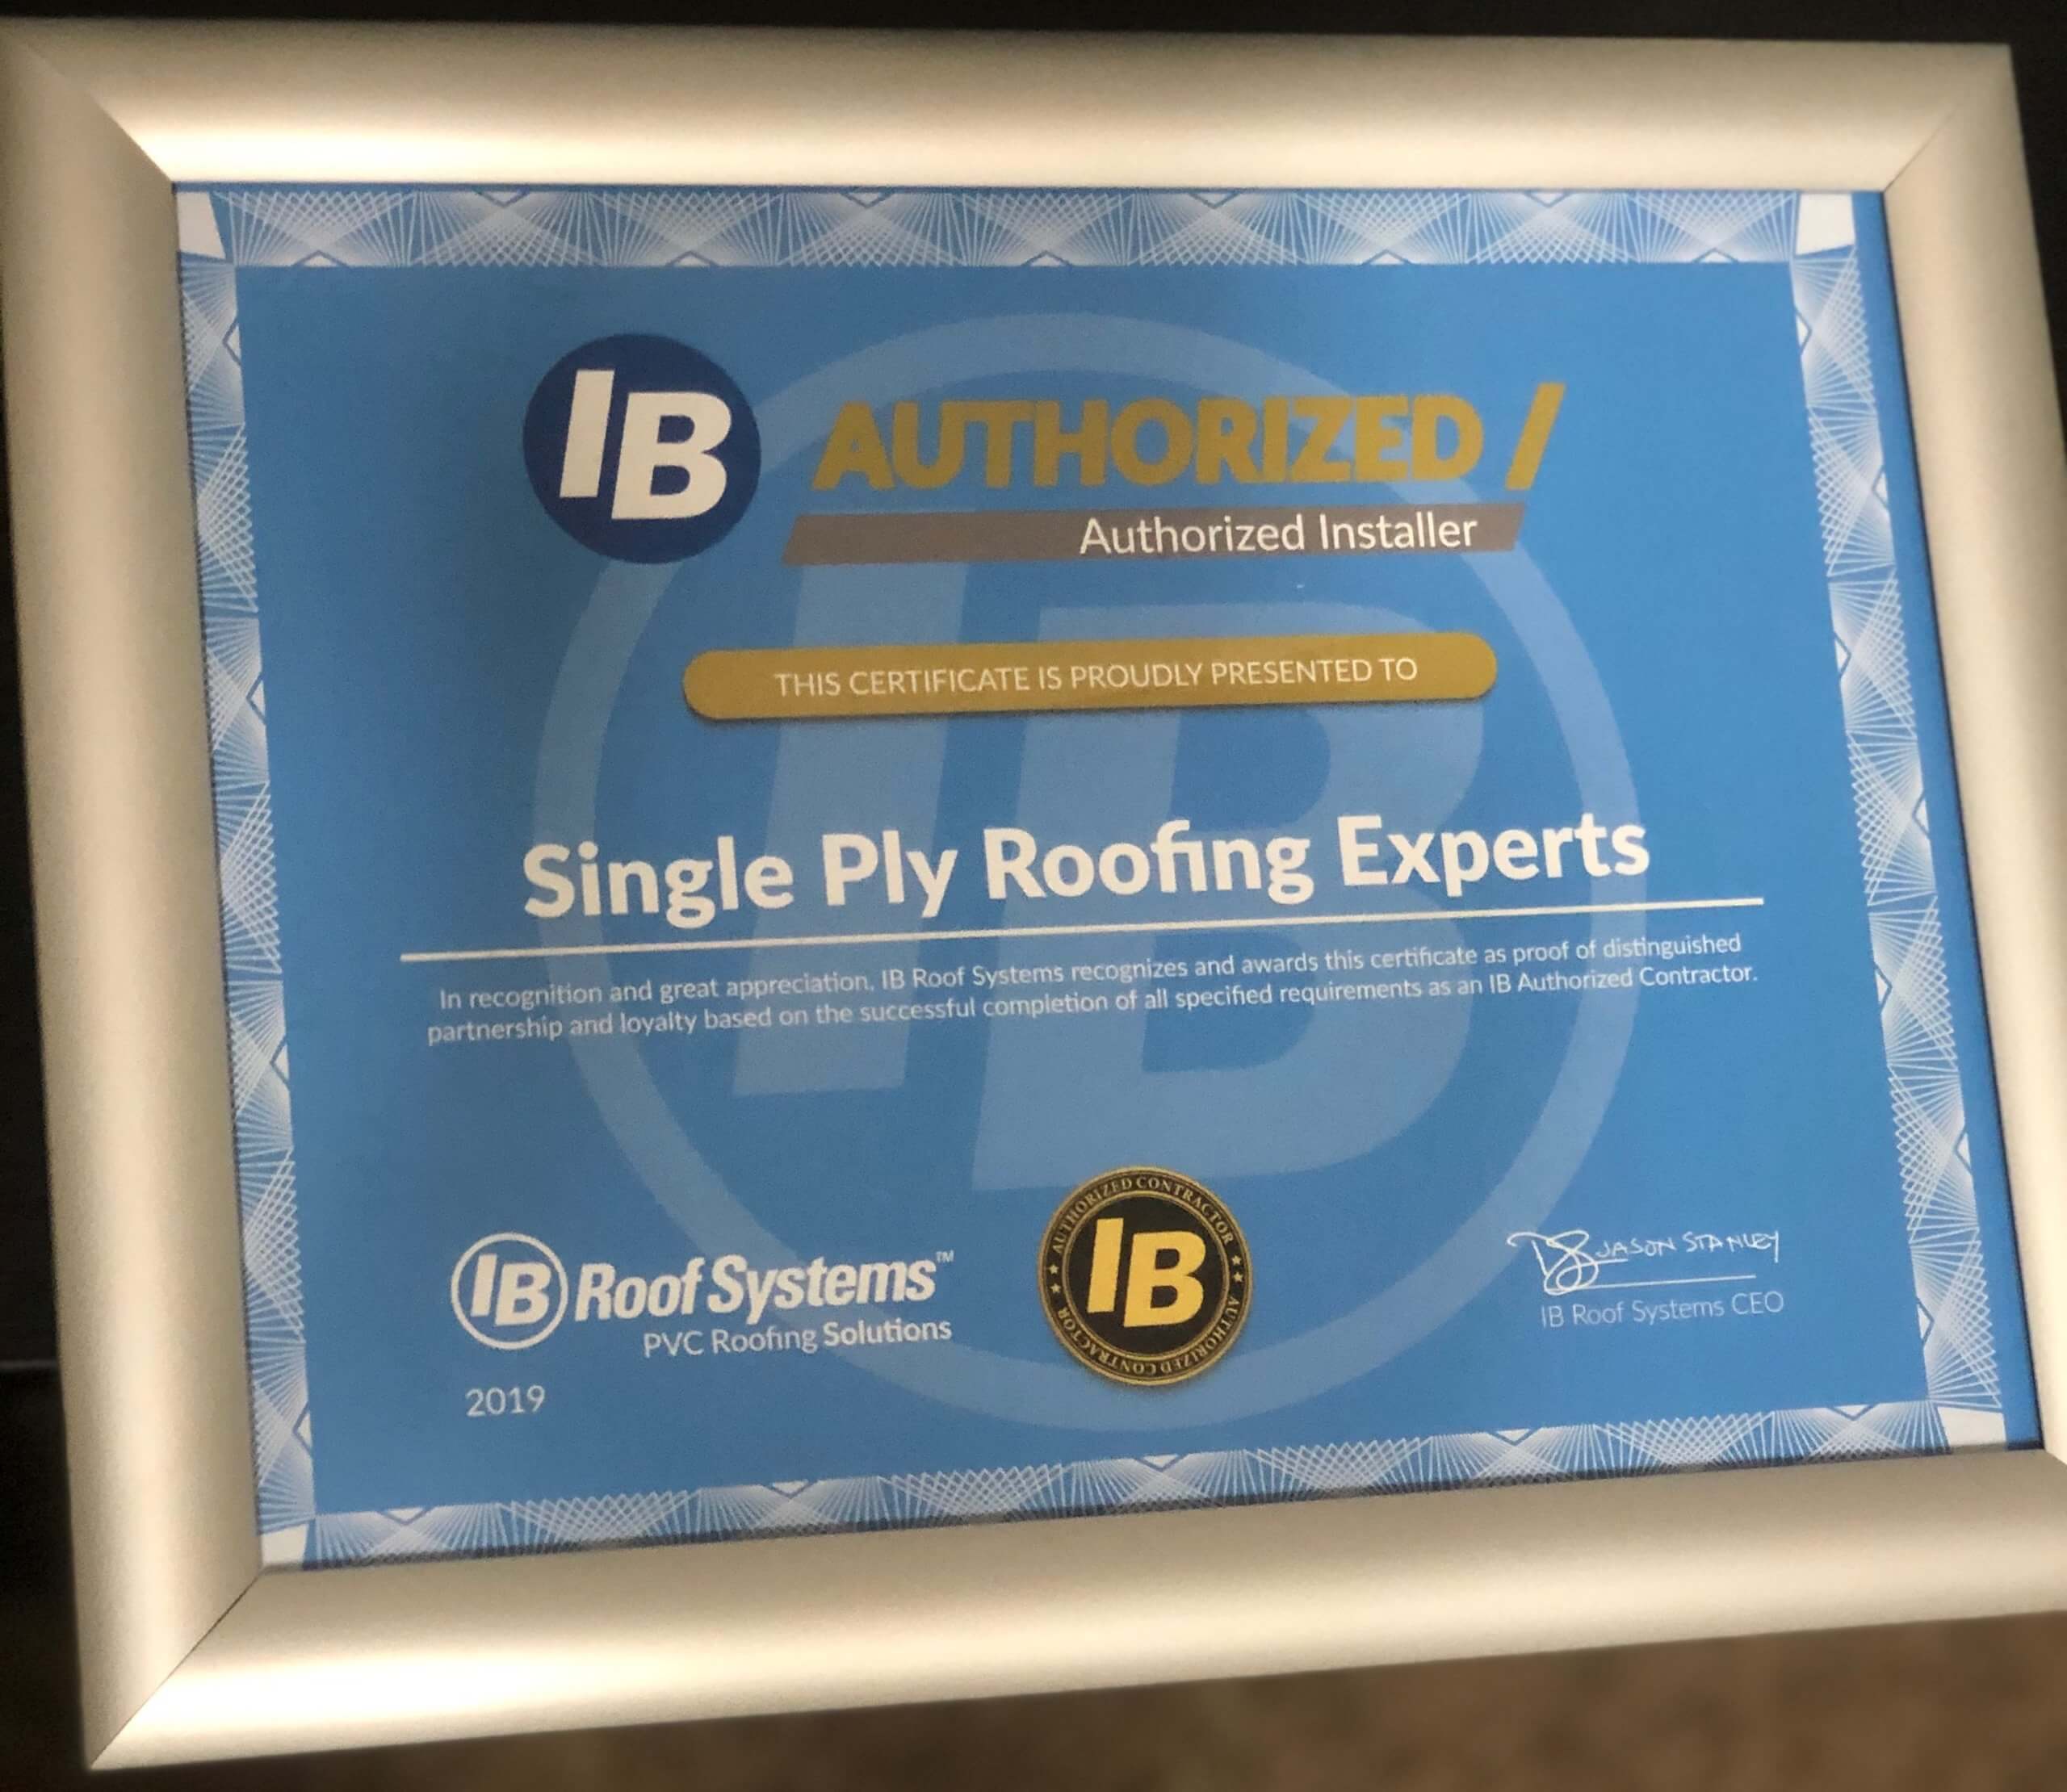 Single Ply Roofing Experts Authorization